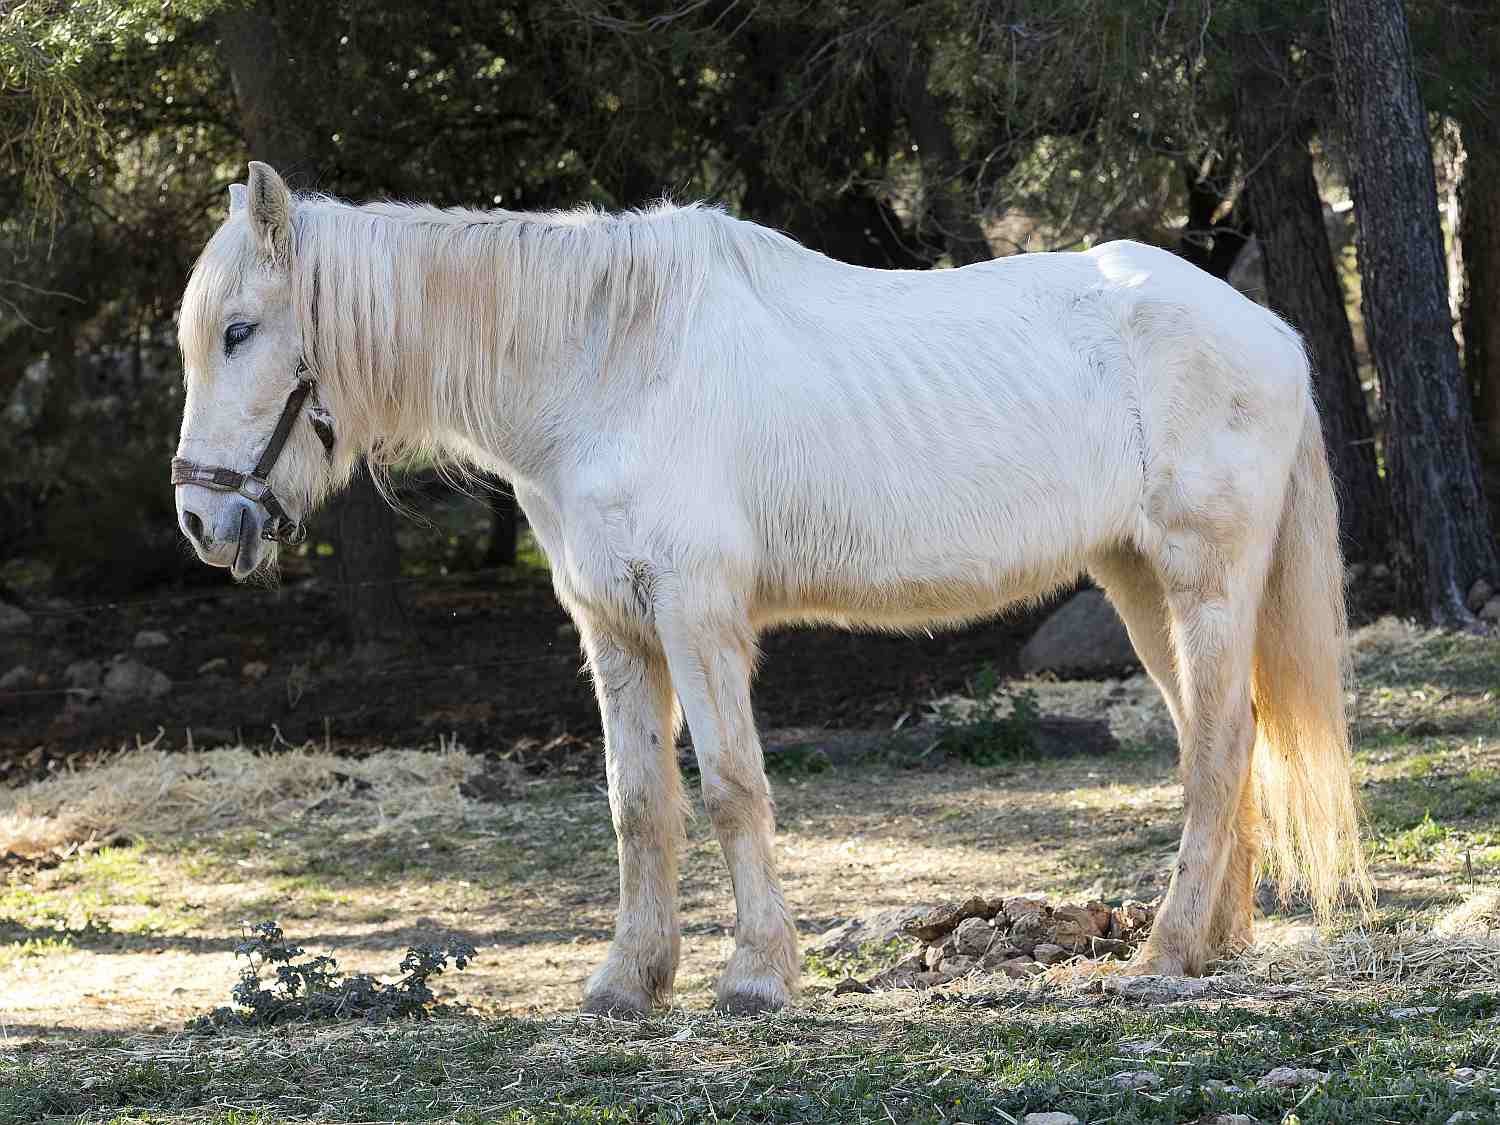 Side view of white pony with ribs showing and long mane.